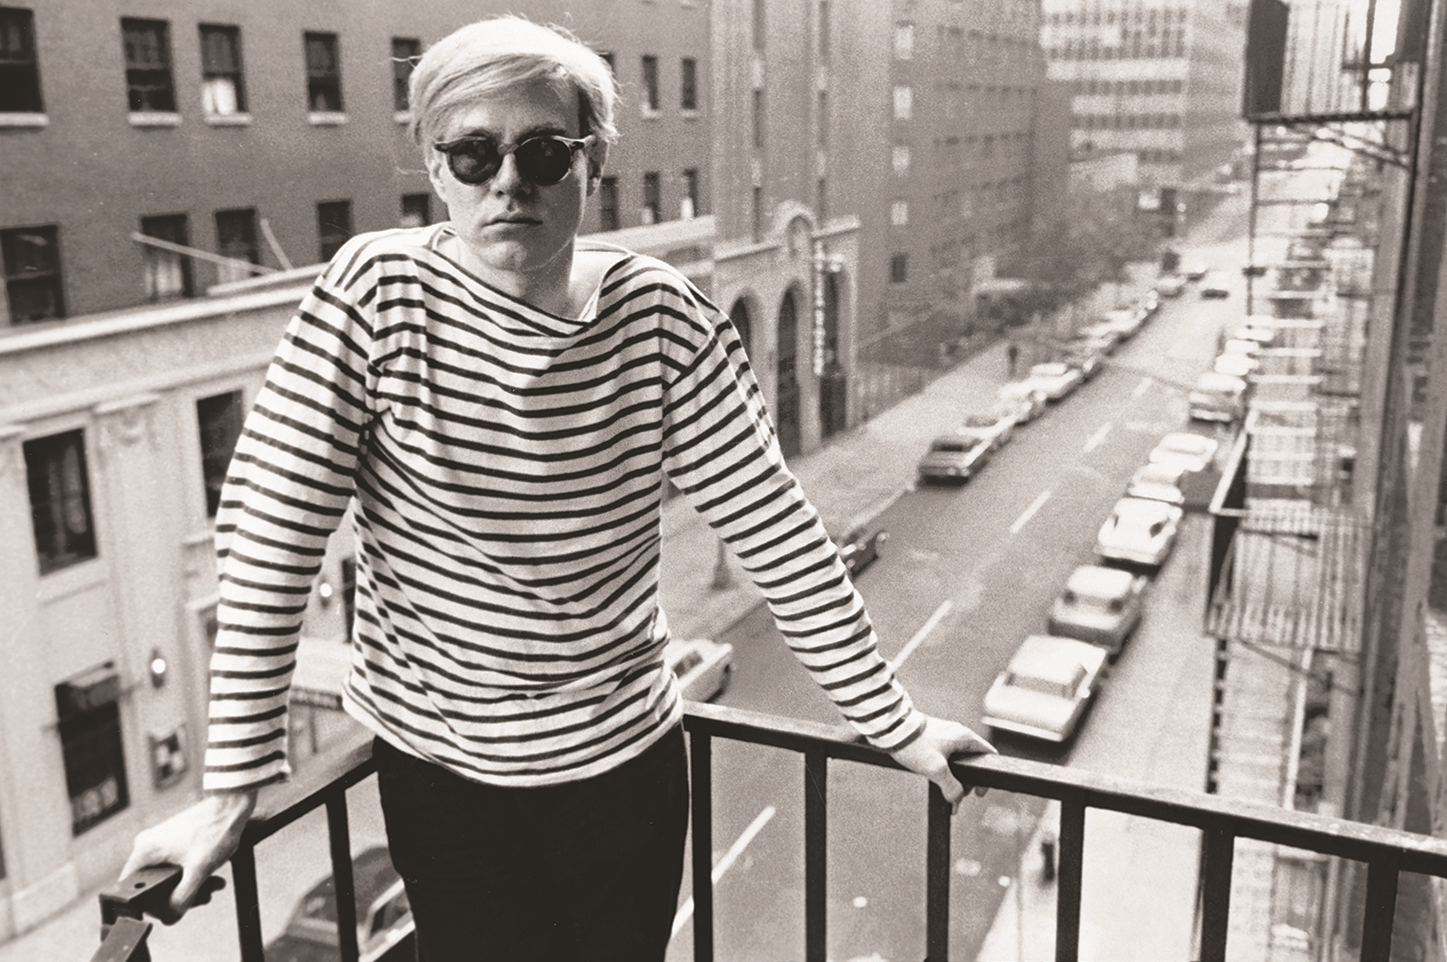 Stephen Shore: Andy Warhol on fire escape of the Factory, 231 East 47th Street, 1965-7. As reproduced in Factory: Andy Warhol by Stephen Shore